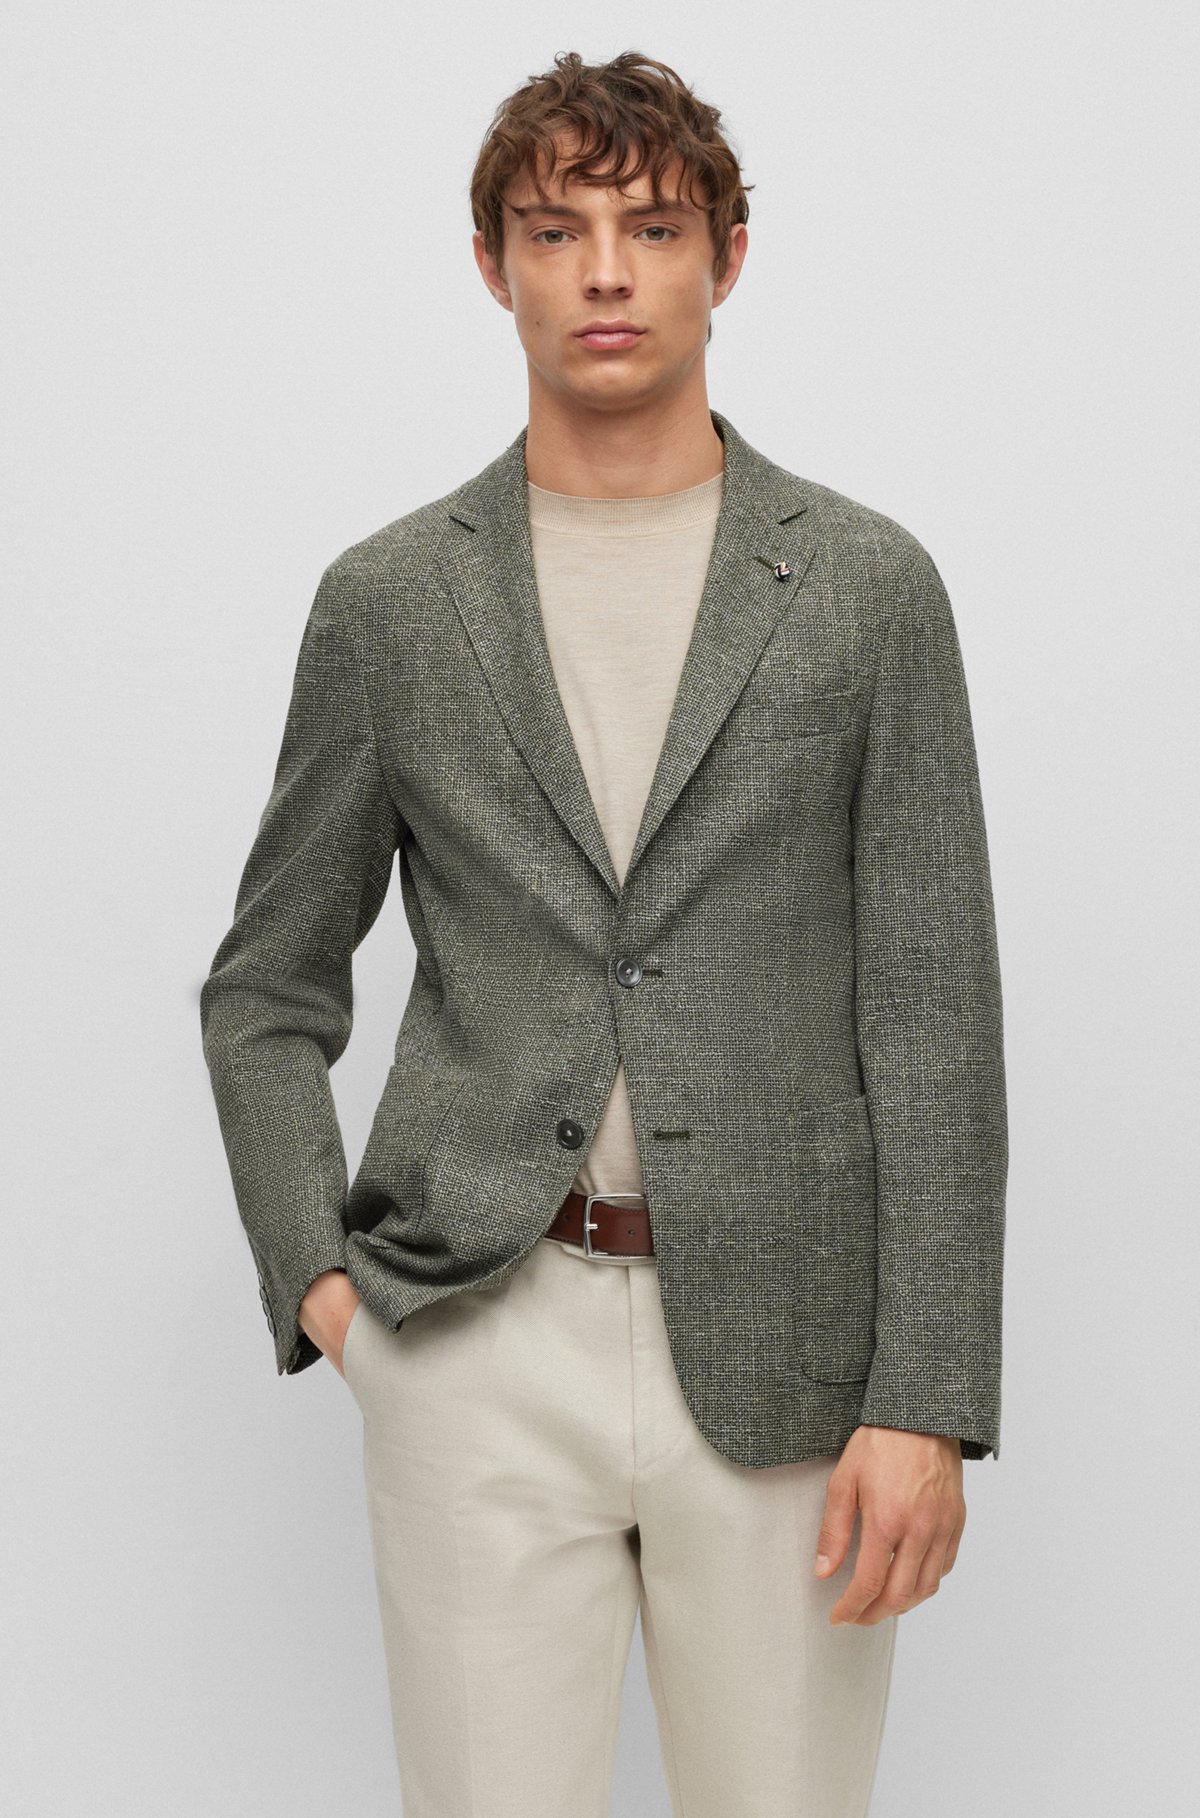 Micro-pattern slim-fit jacket in a cotton blend, Grey